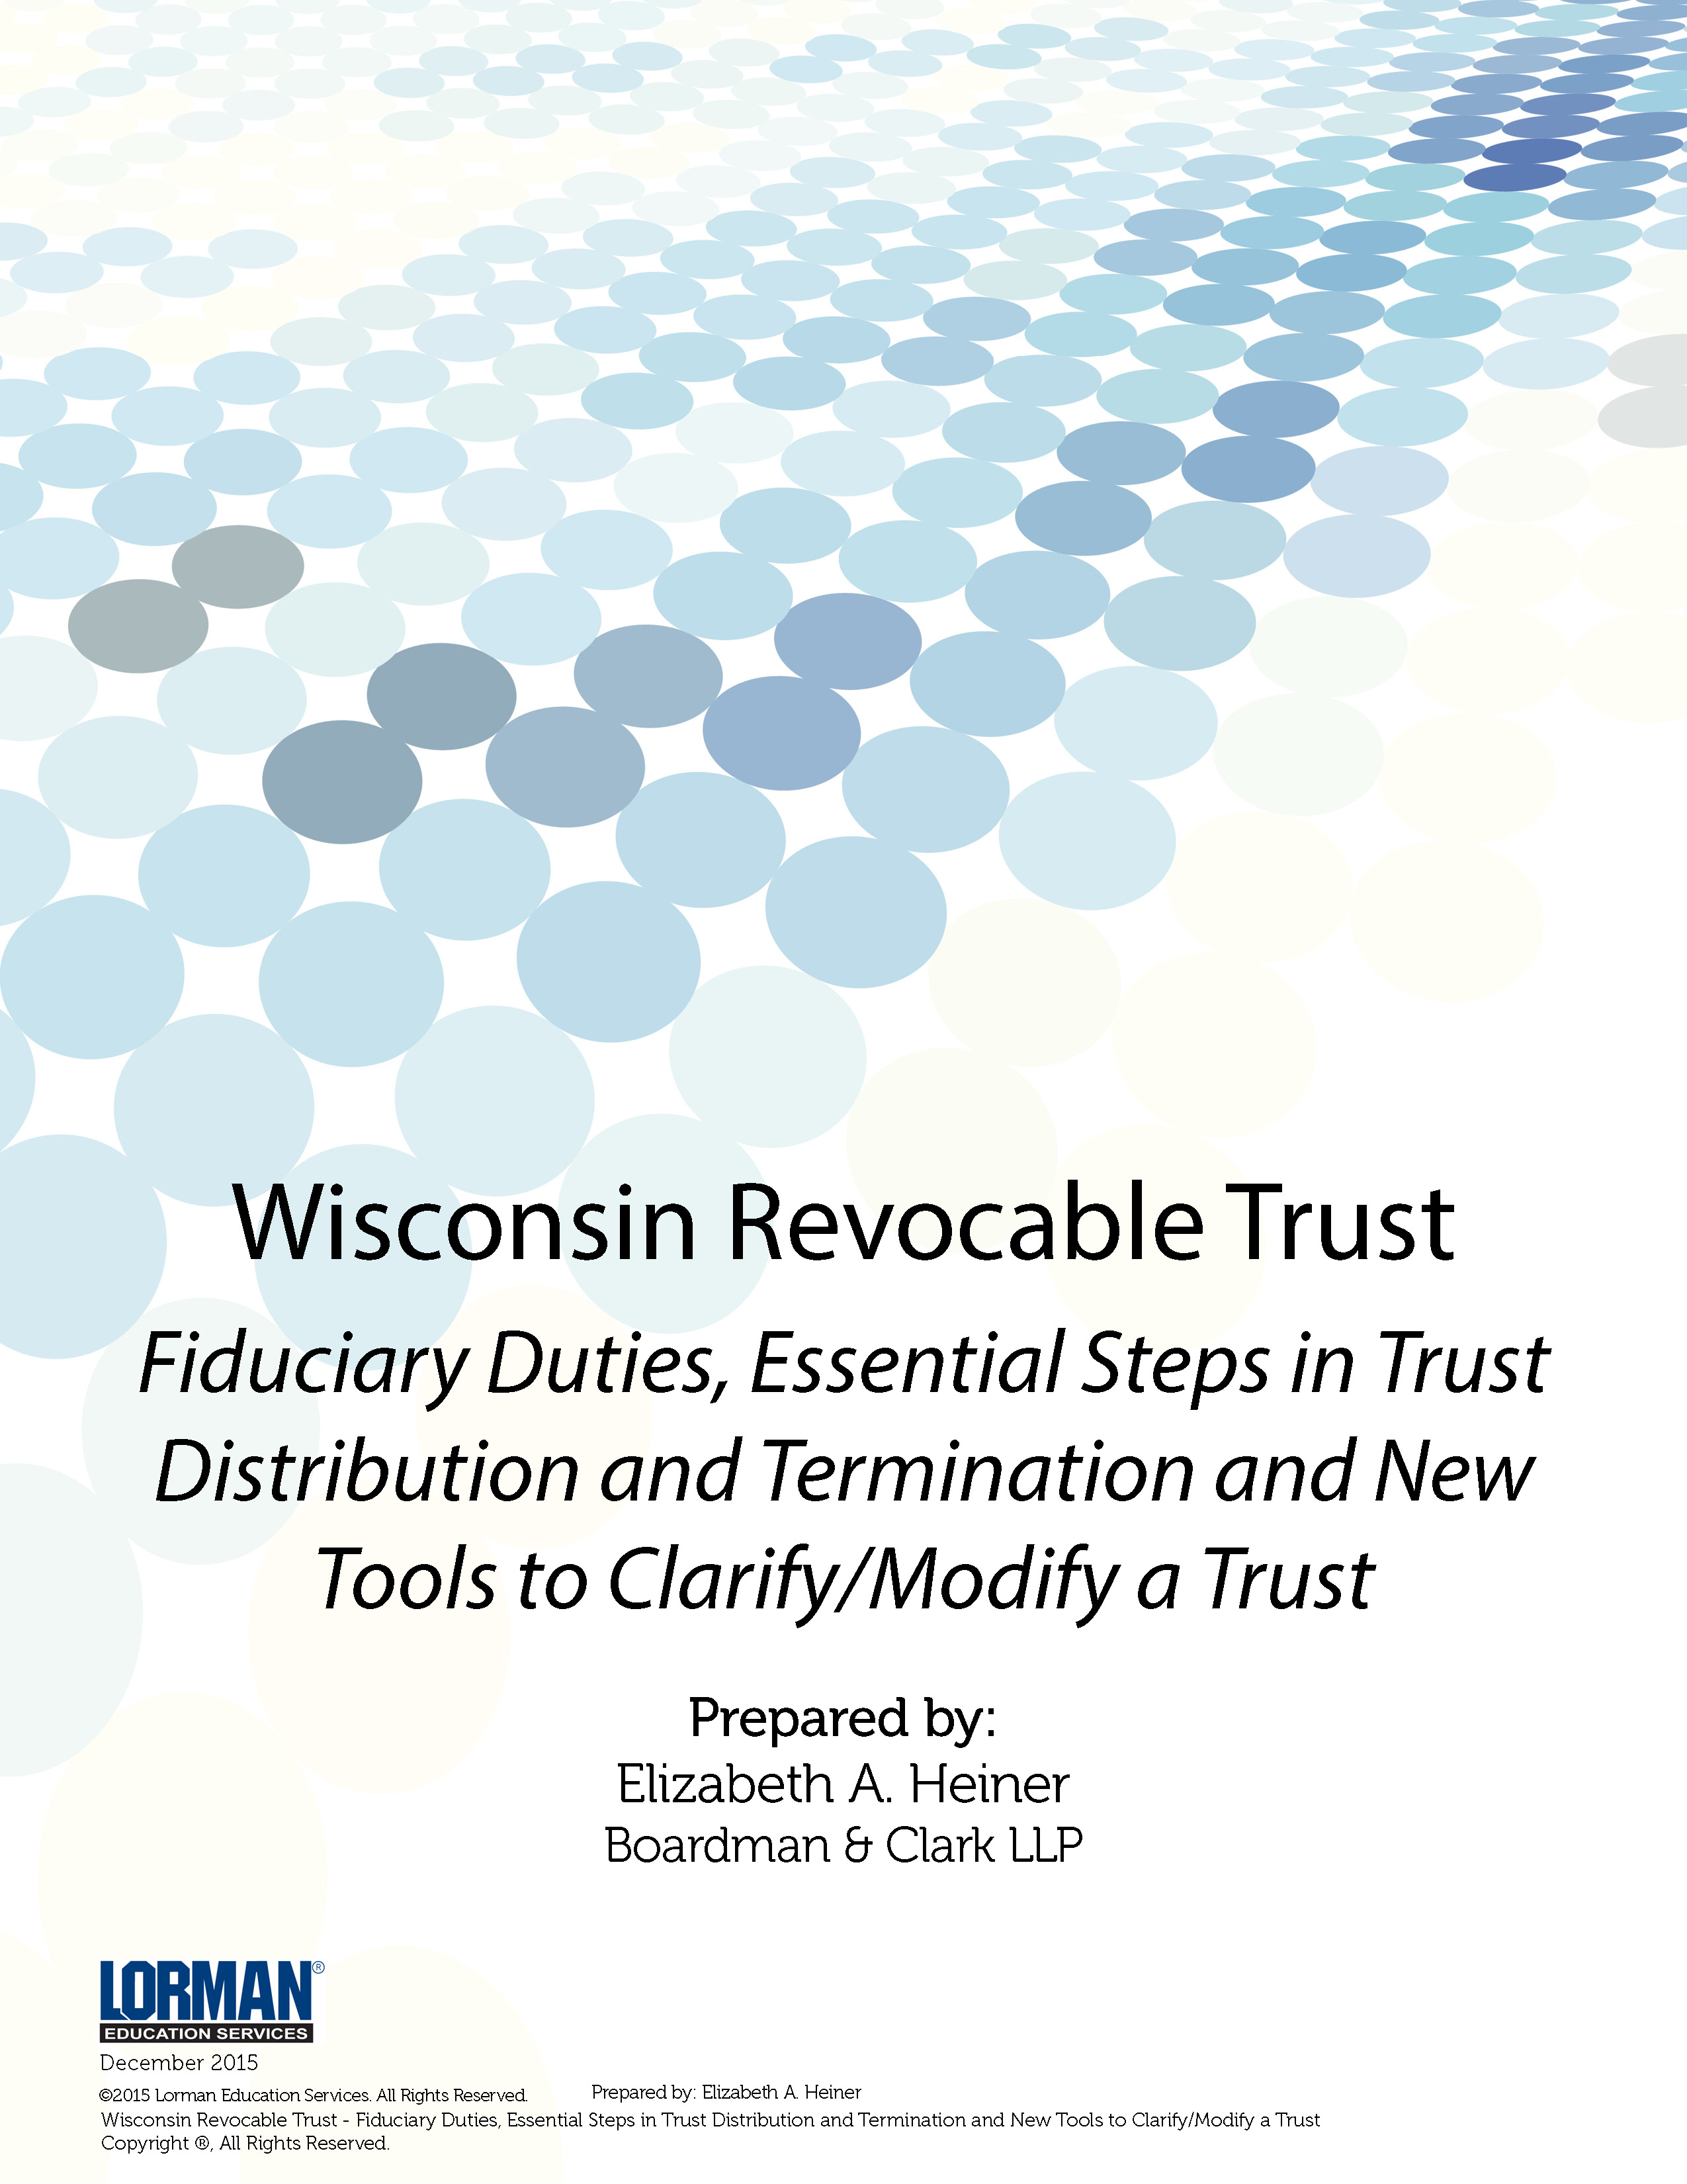 Wisconsin Revocable Trust - Fiduciary Duties, Essential Steps in Trust Distribution and Termination and New Tools to Clarify/Modify a Trust